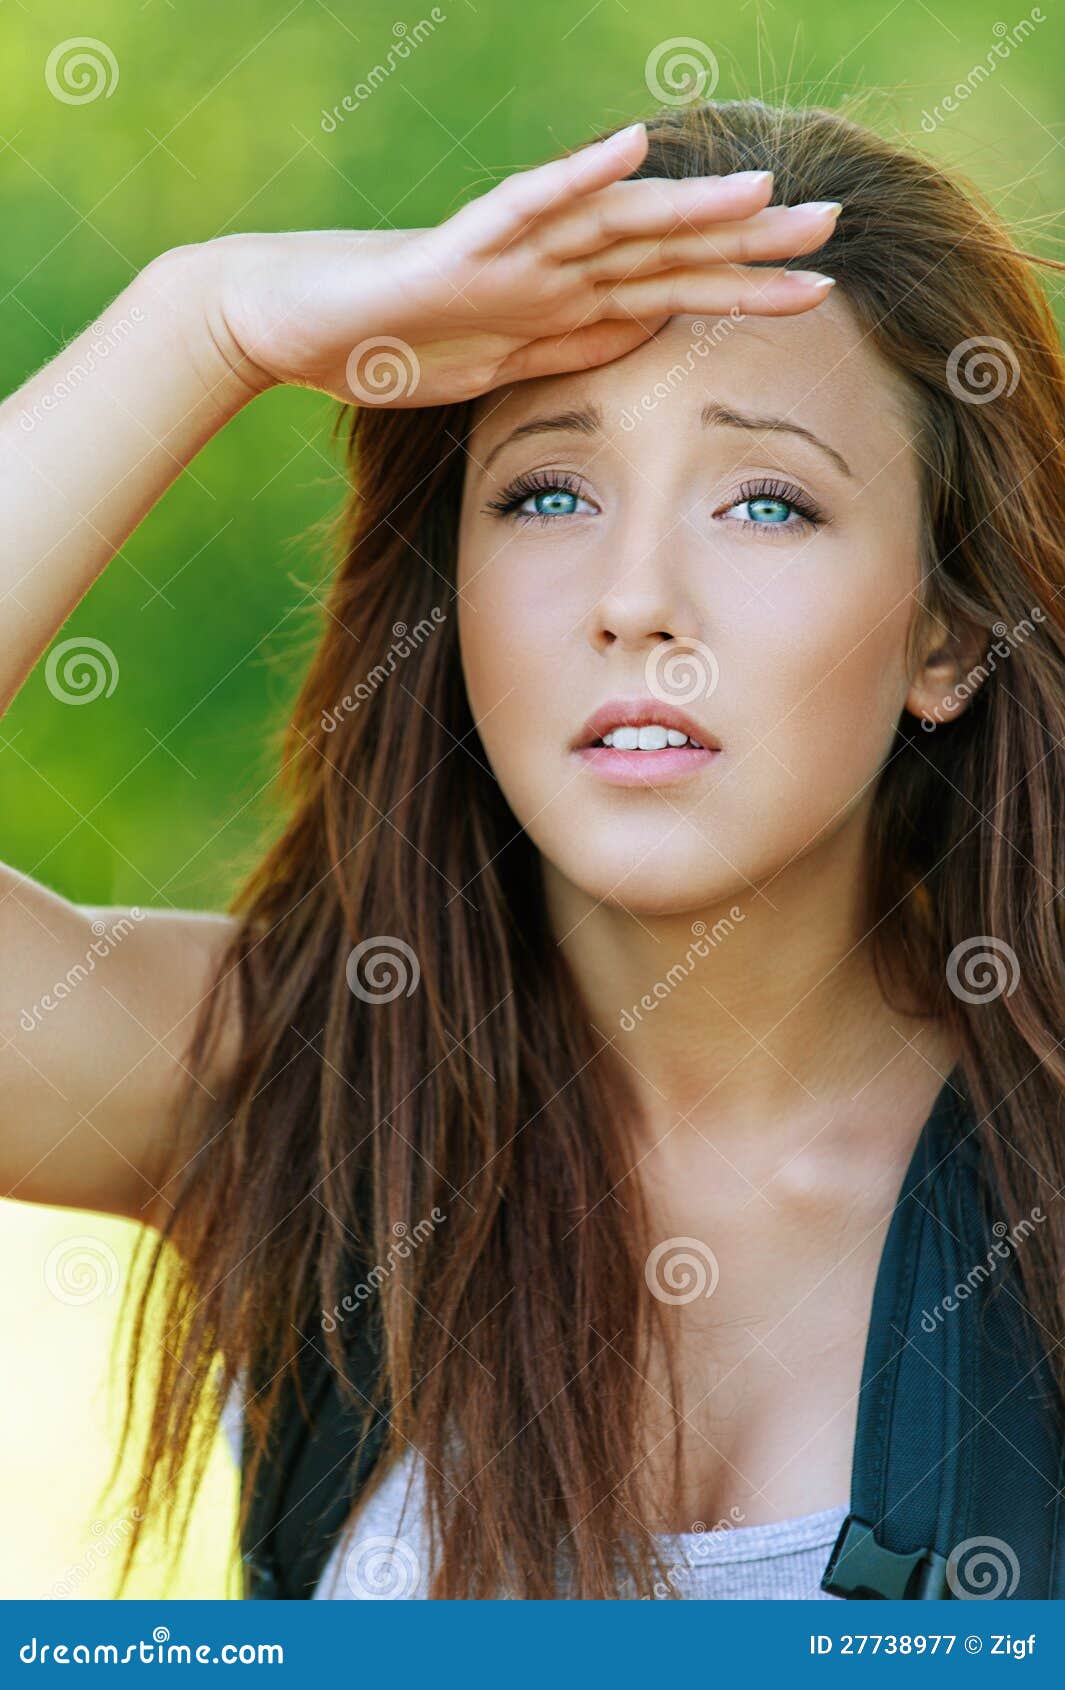 Young Woman with Hand Closes Eyes Stock Image - Image of hand, boredom ...